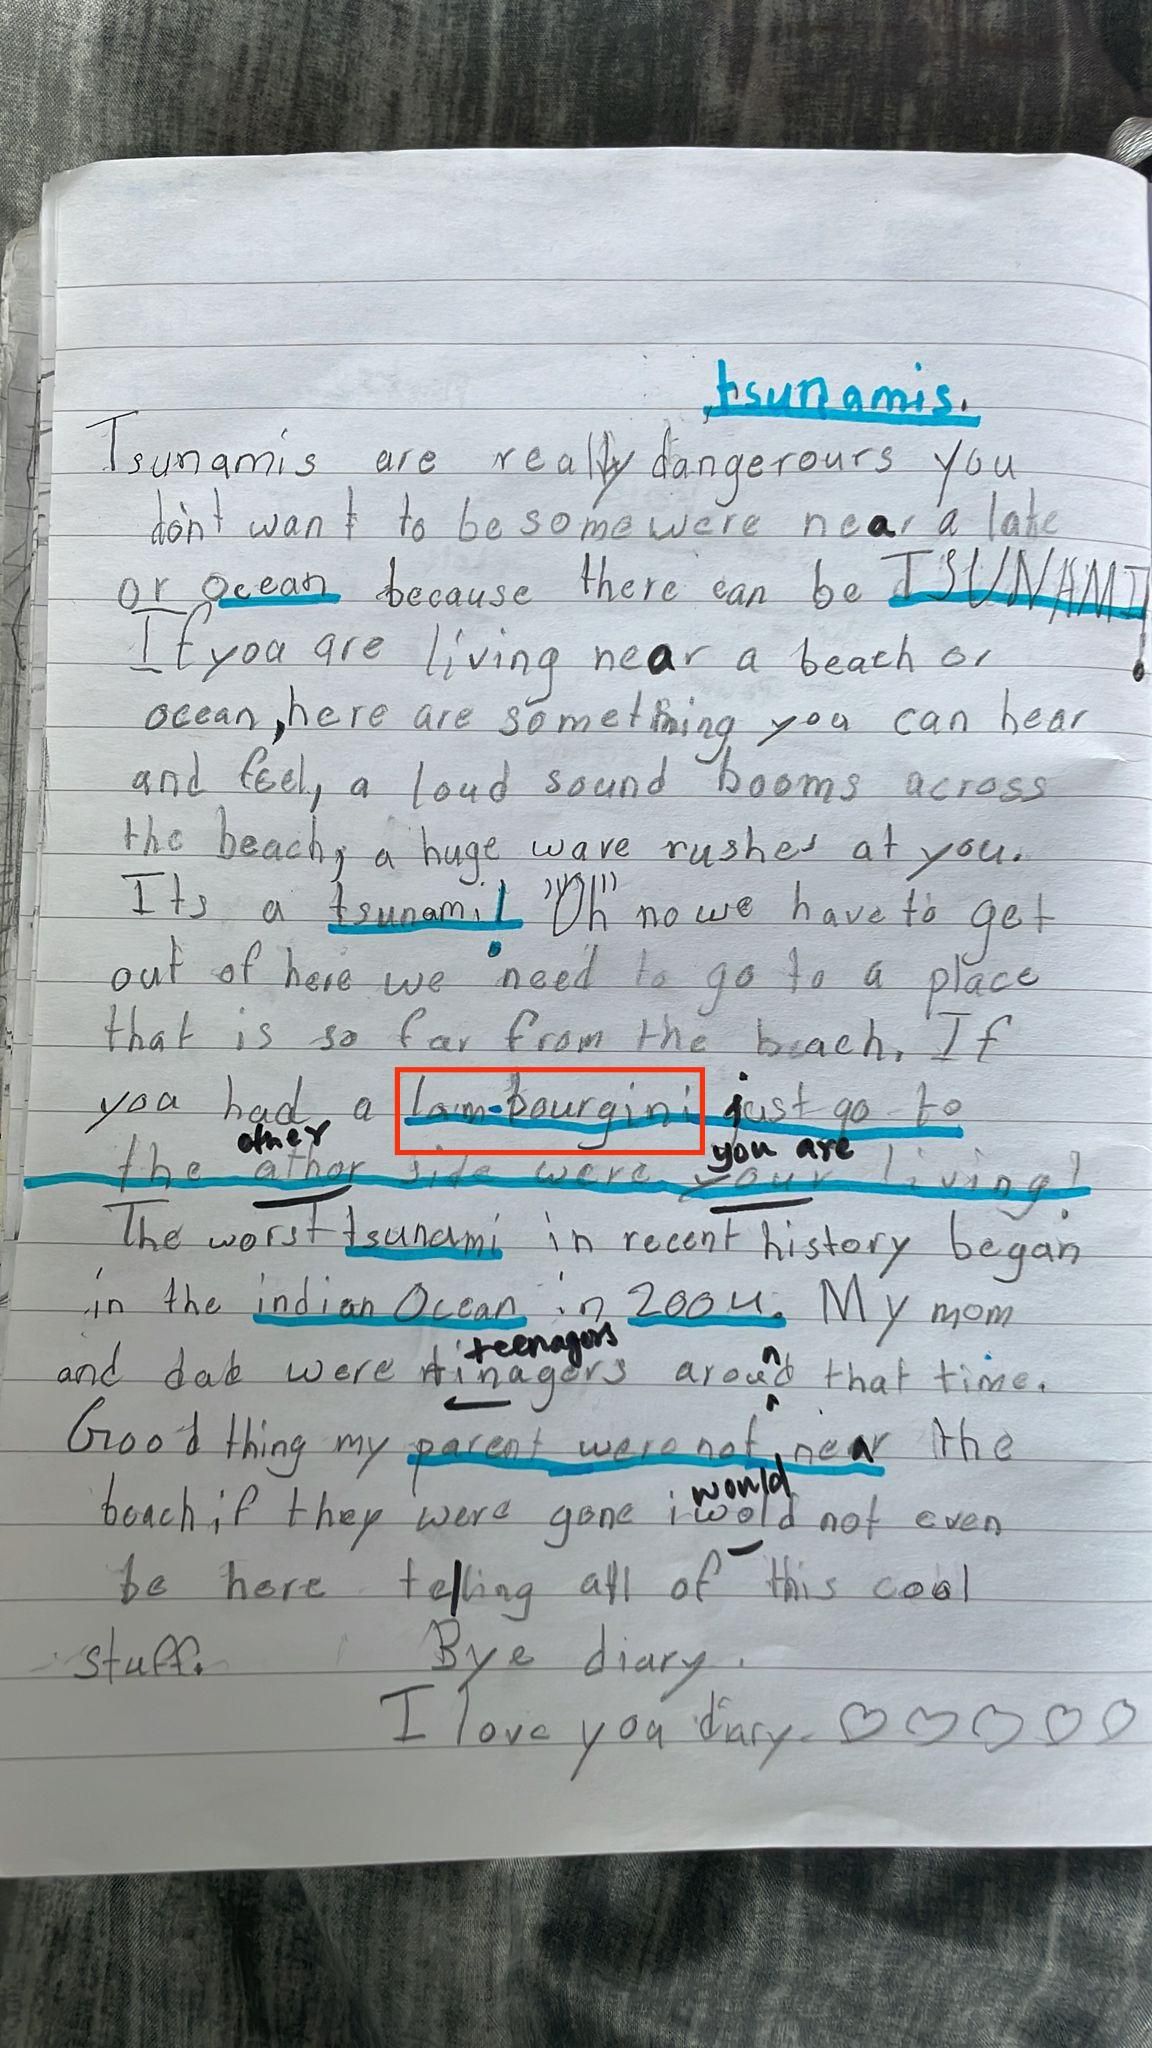 My daughter of 7 started to write diary. She has a costly escape plan if a tsunami happens